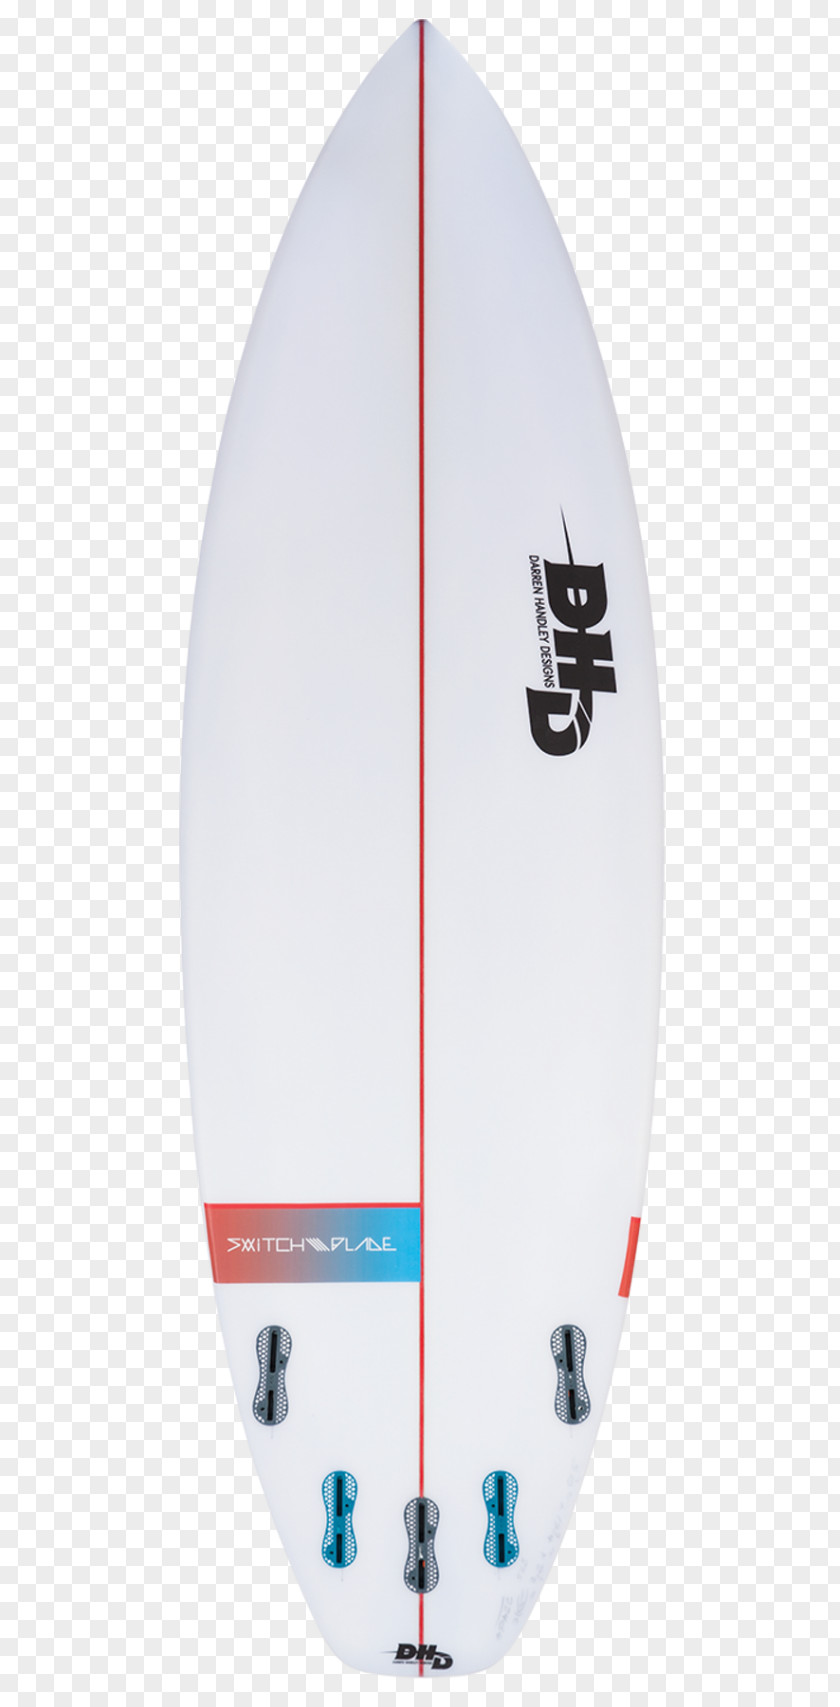 Surfing Surfboard Shaper Gold Coast PNG